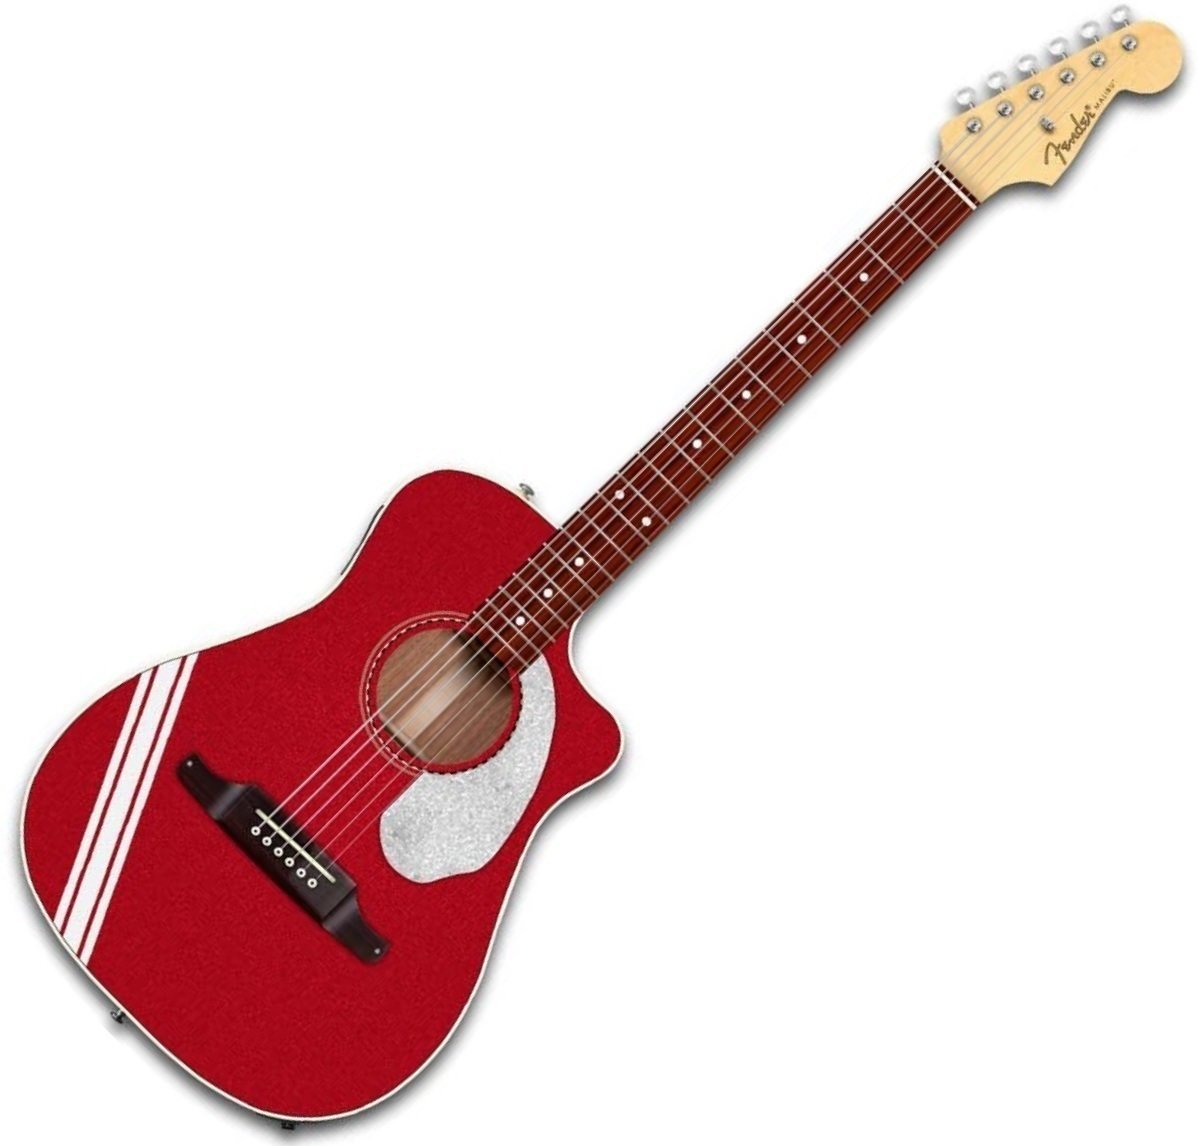 Electro-acoustic guitar Fender FSR Malibu Mustang Candy Apple Red RS